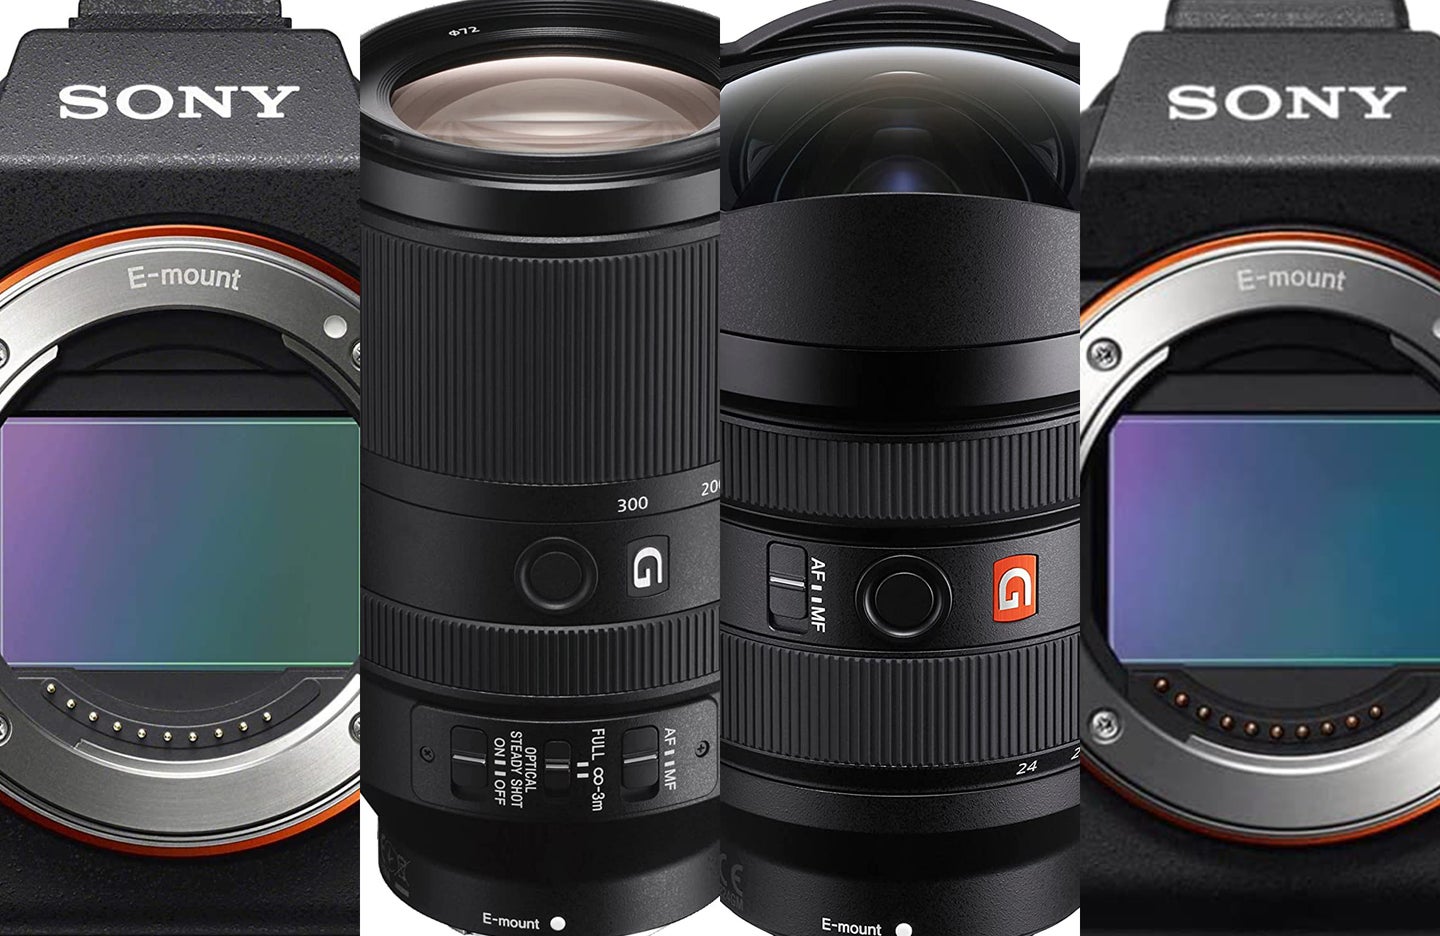 The best Black Friday deals on Sony cameras and lenses